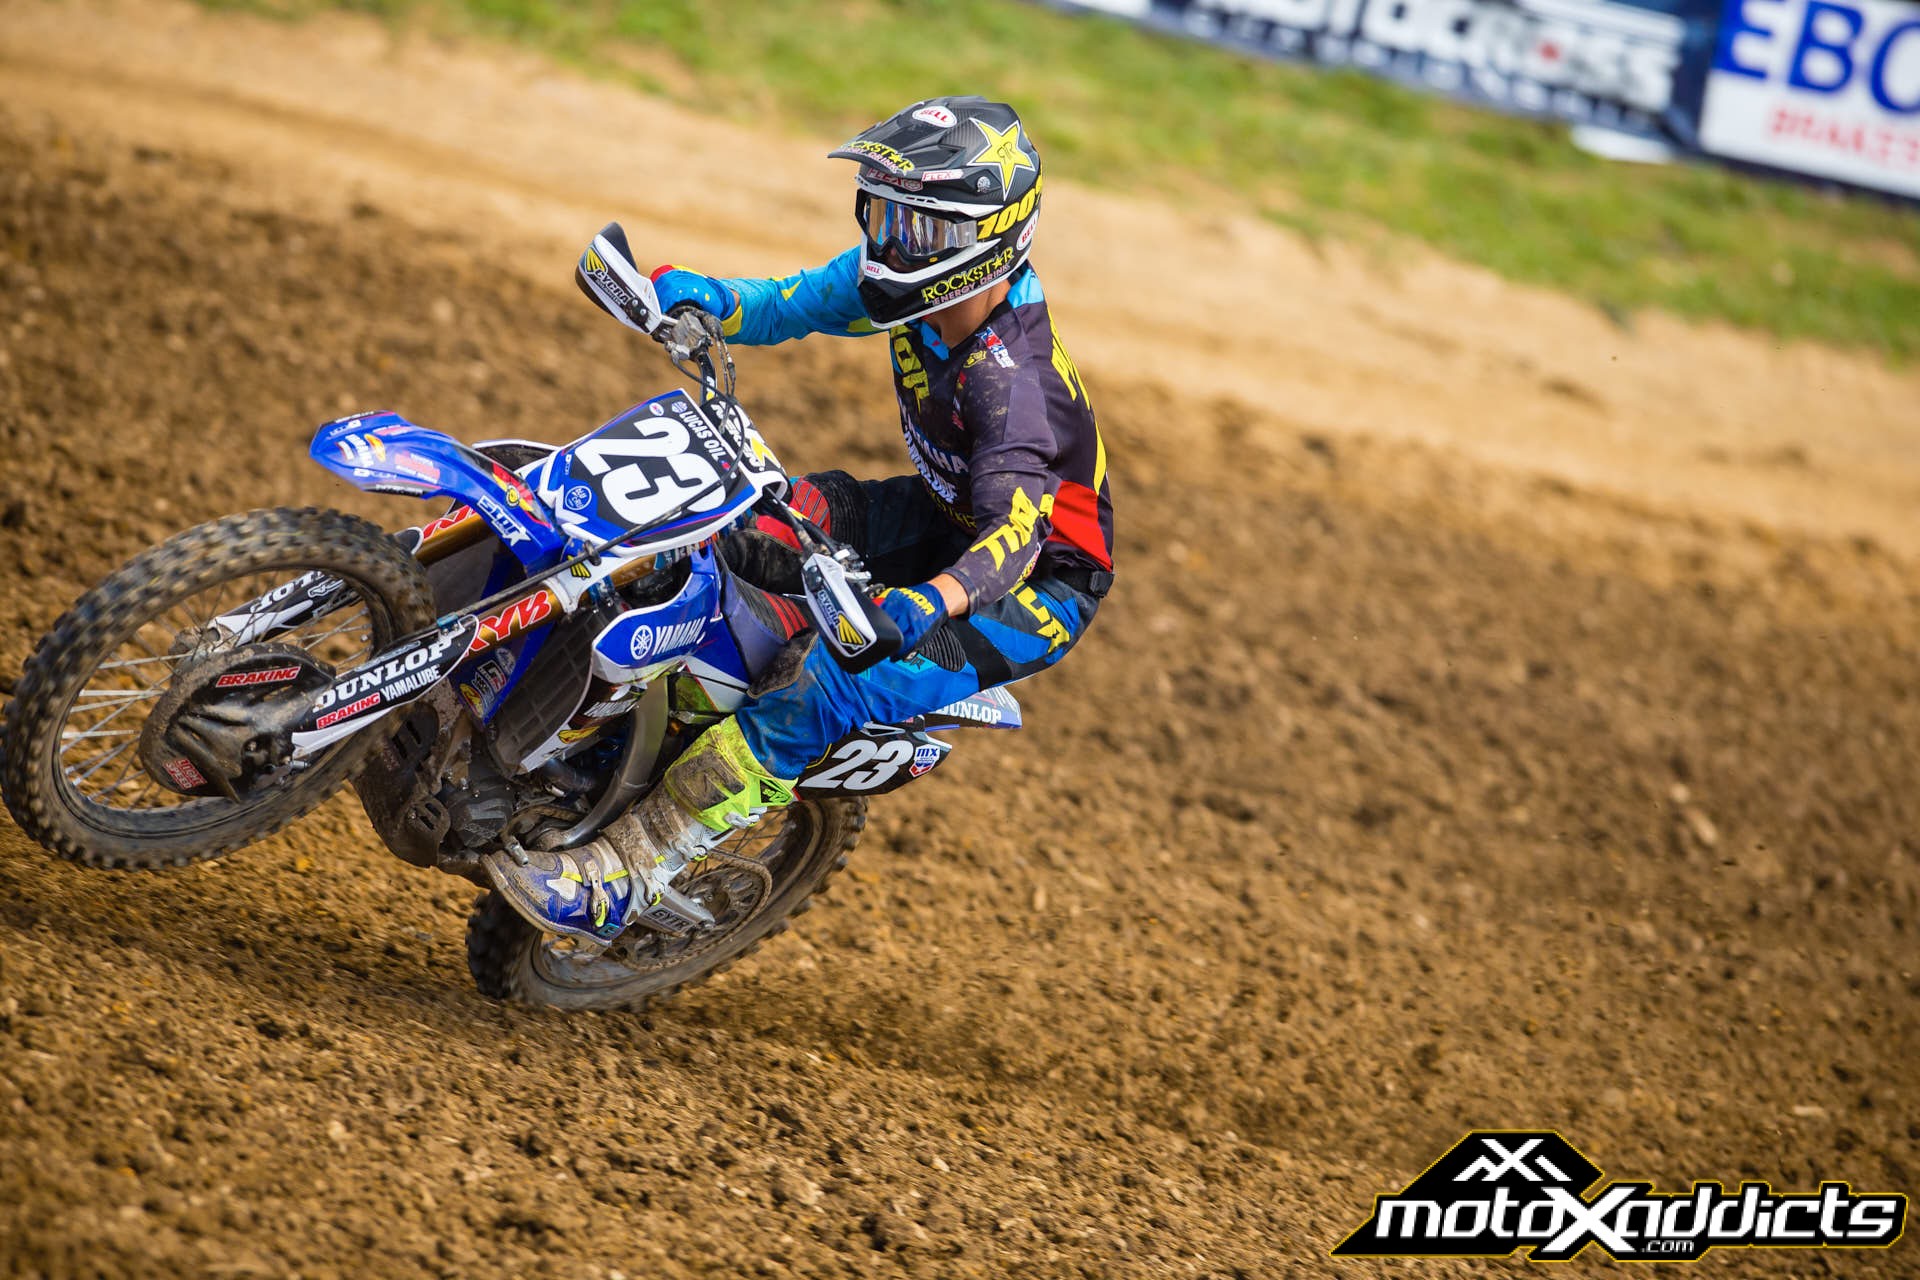 Aaron Plessinger has the speed, but good starts have been few and far between.